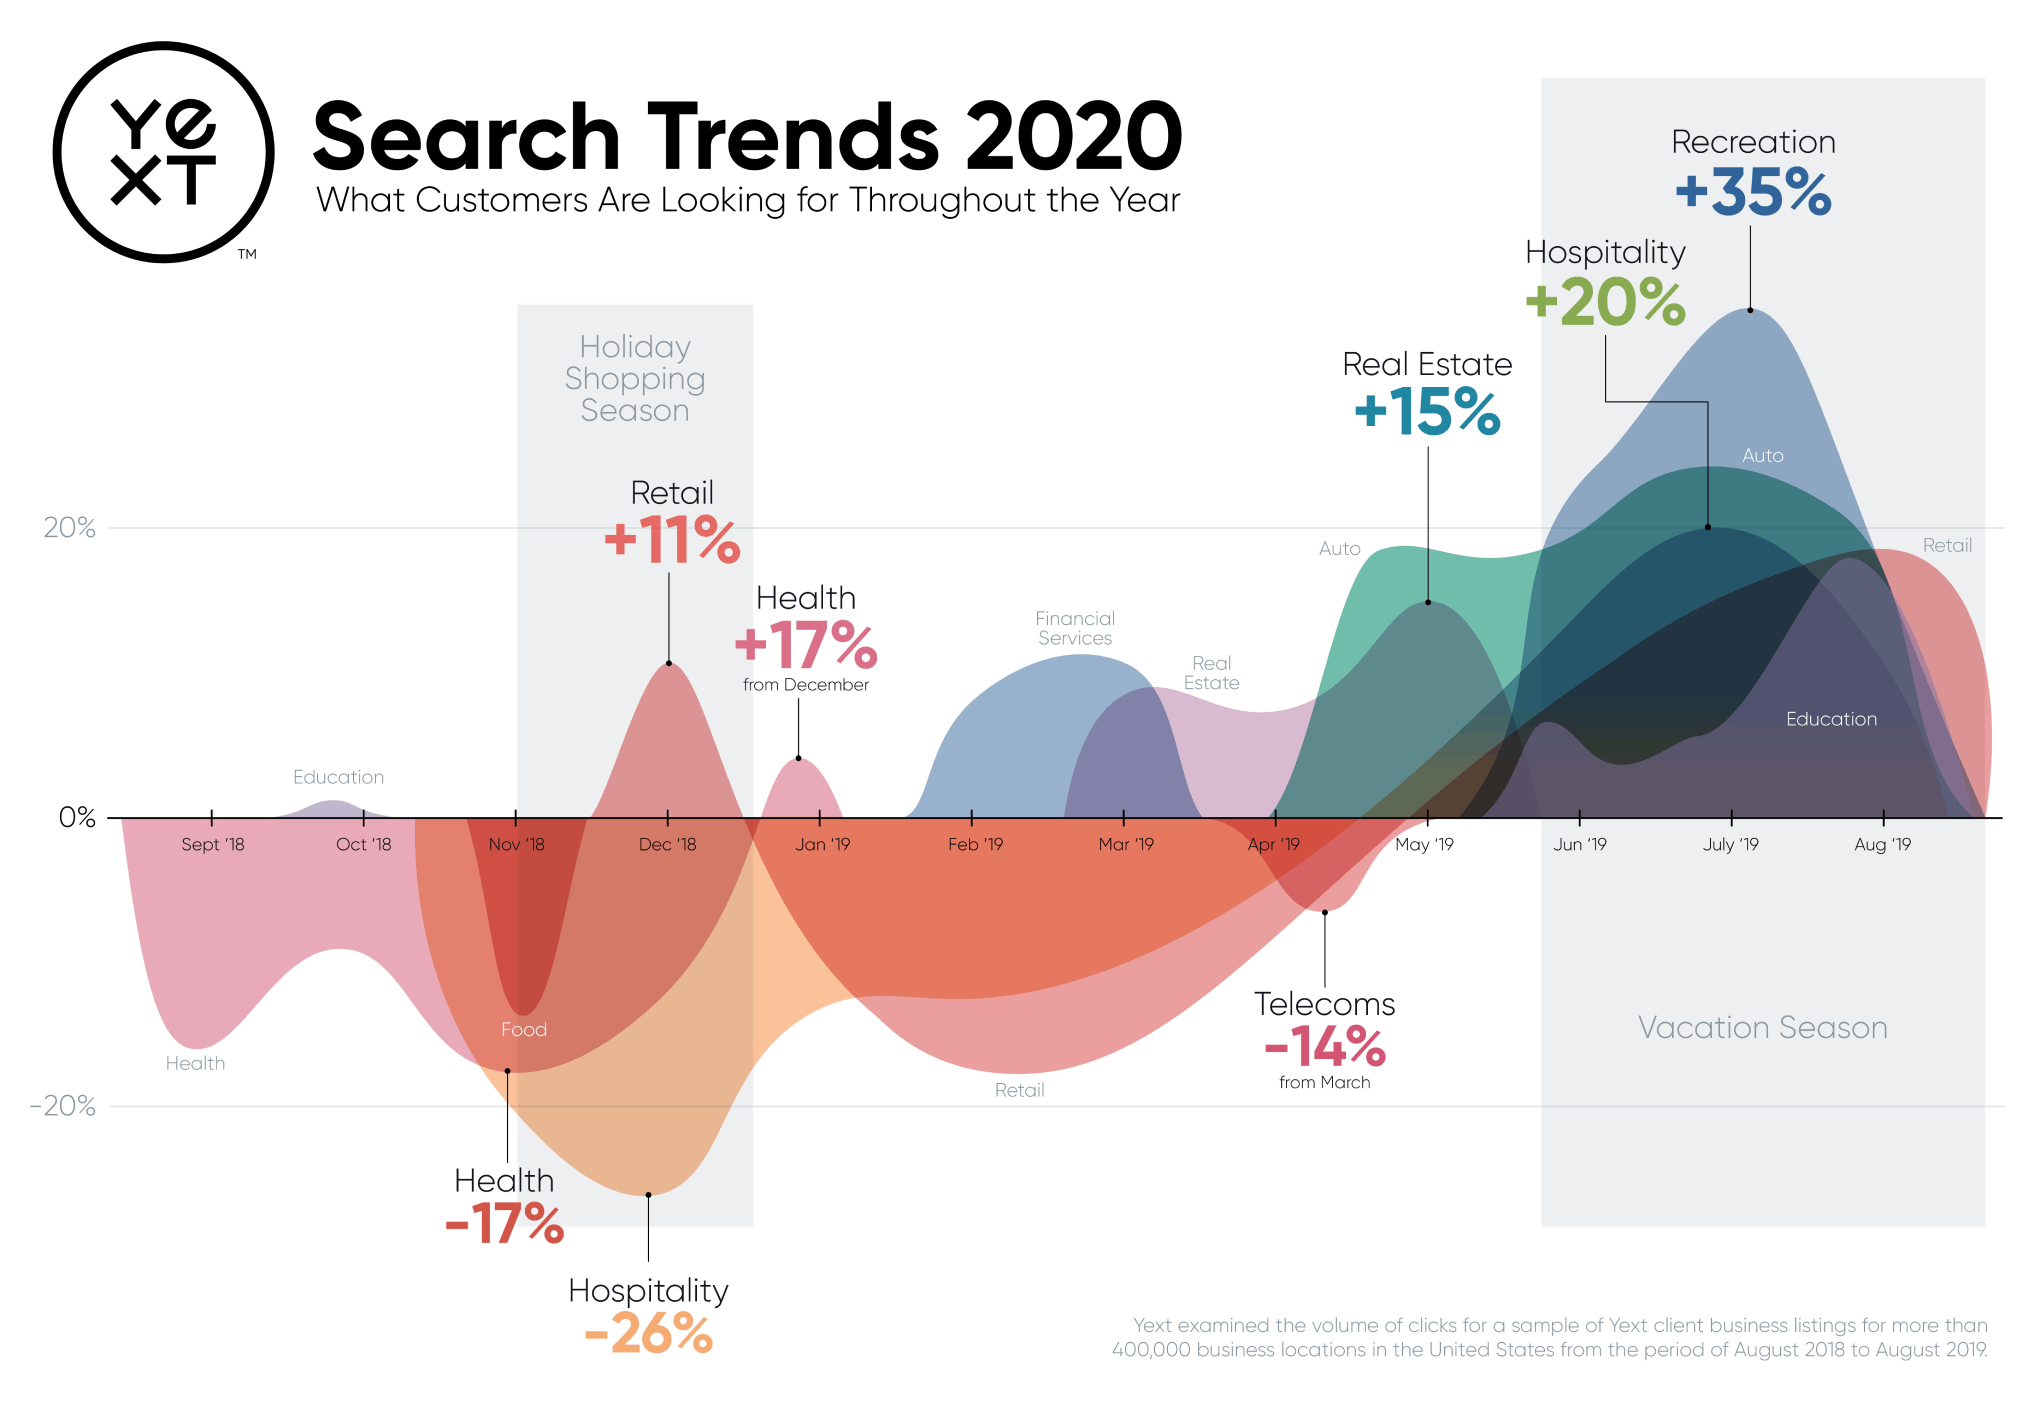 Search Trends 2020: What Customers Are Looking for Throughout the Year